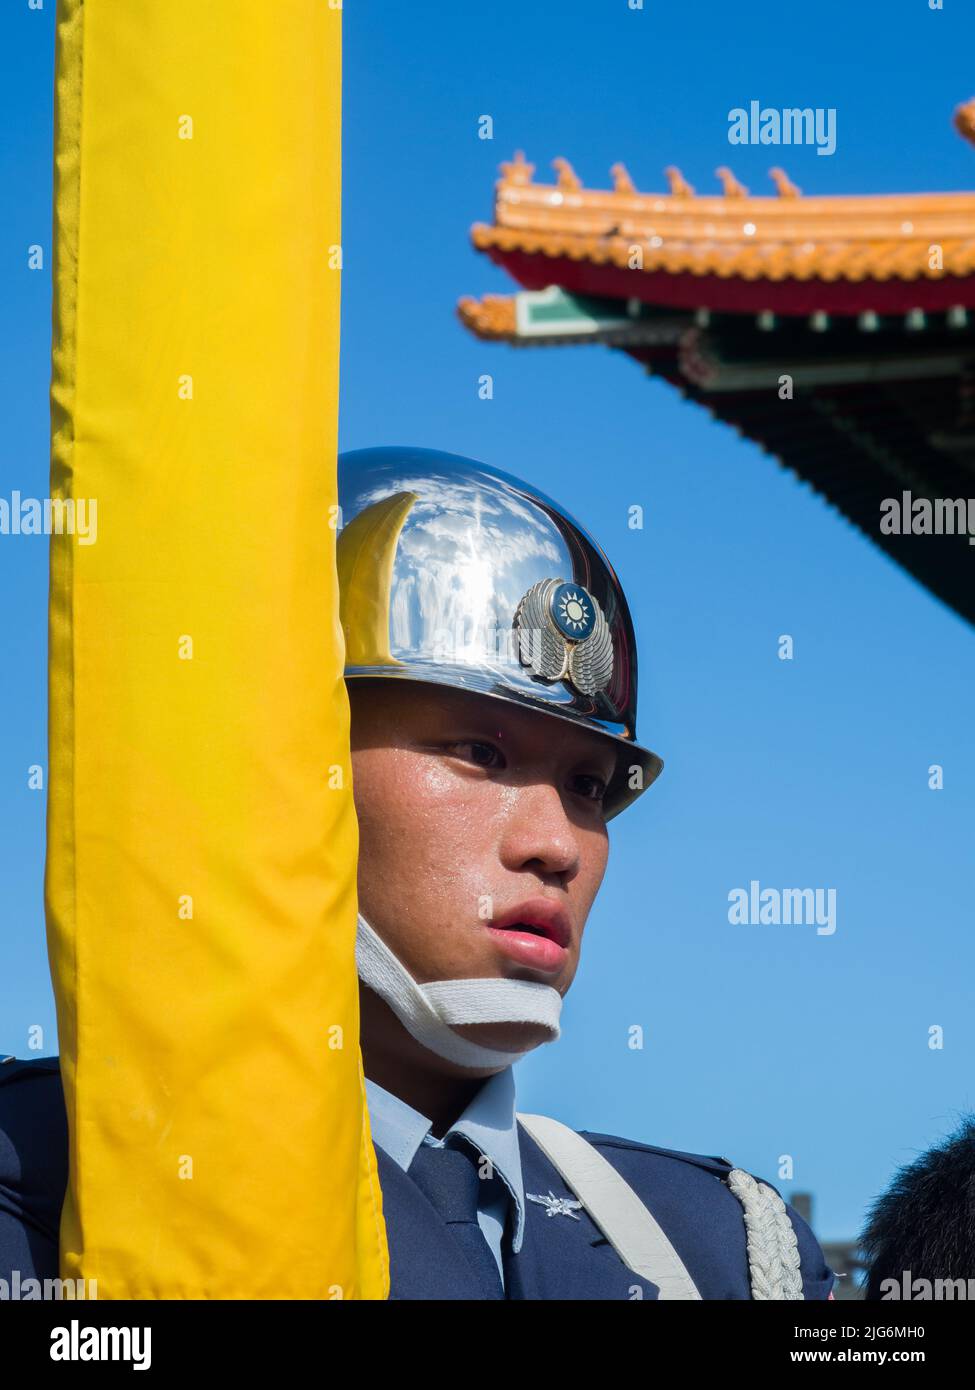 Taipei, Taiwan - October 02, 2016: Soldier wearing shining helmet with a  reflection of the building National Theatre on it Stock Photo